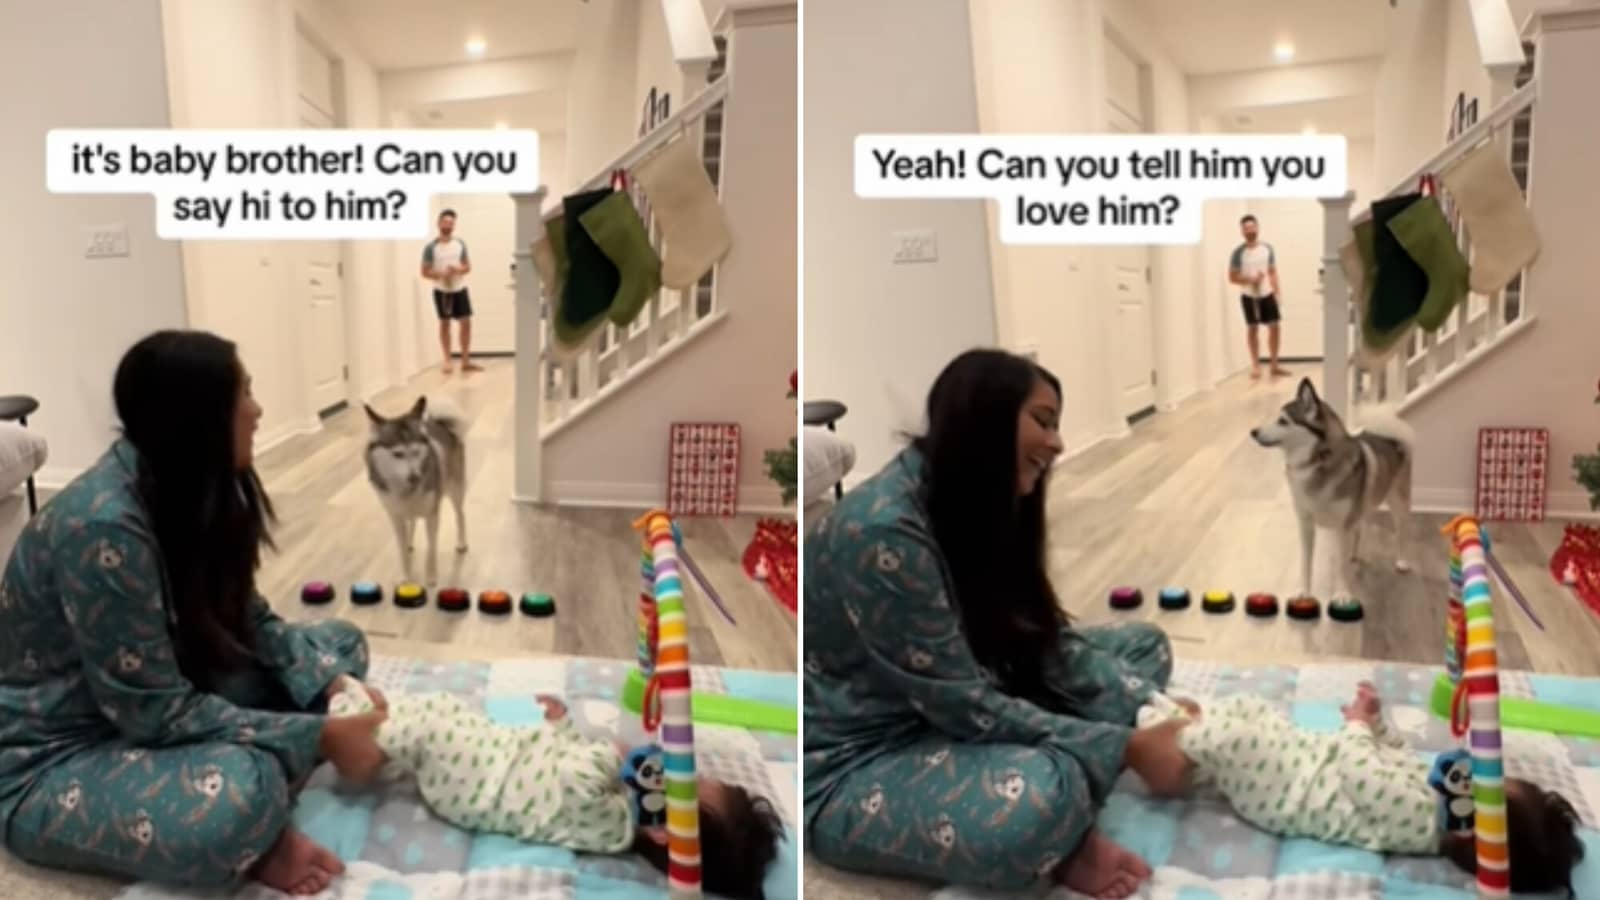 Woman asks husky to say ‘I love you’ to baby, dog replies using pet button. Watch